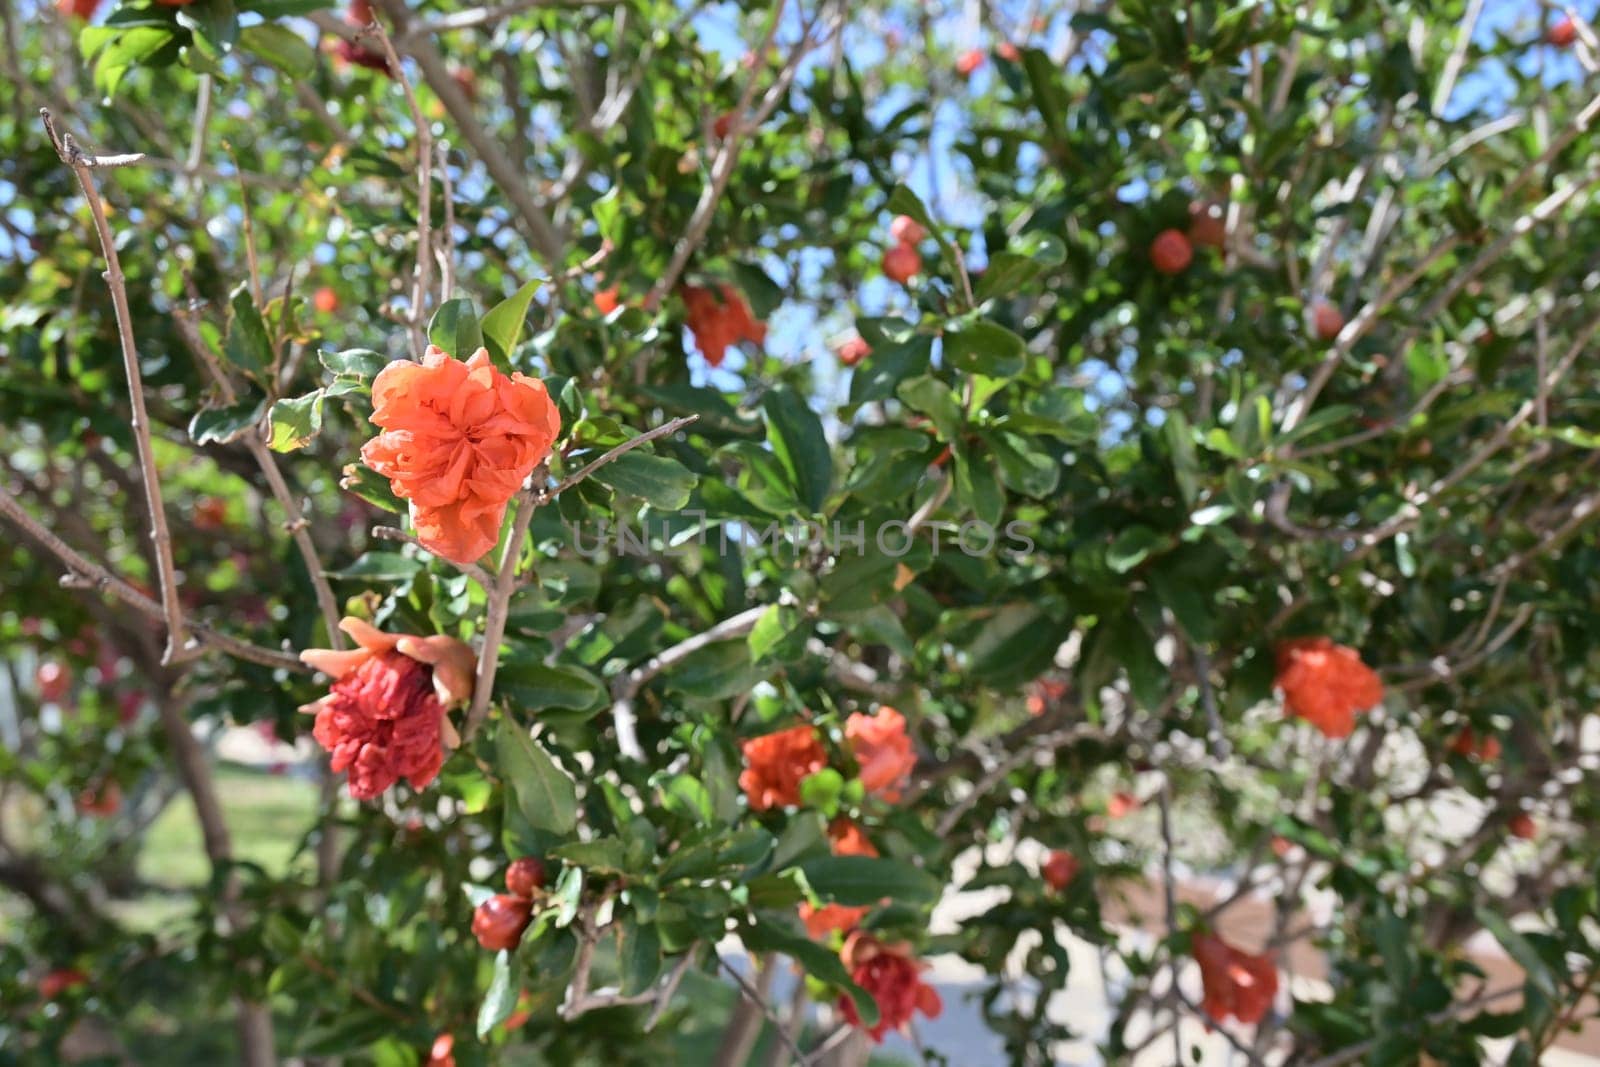 Red pomegranate flowers on pomegranate tree in the garden by jcdiazhidalgo